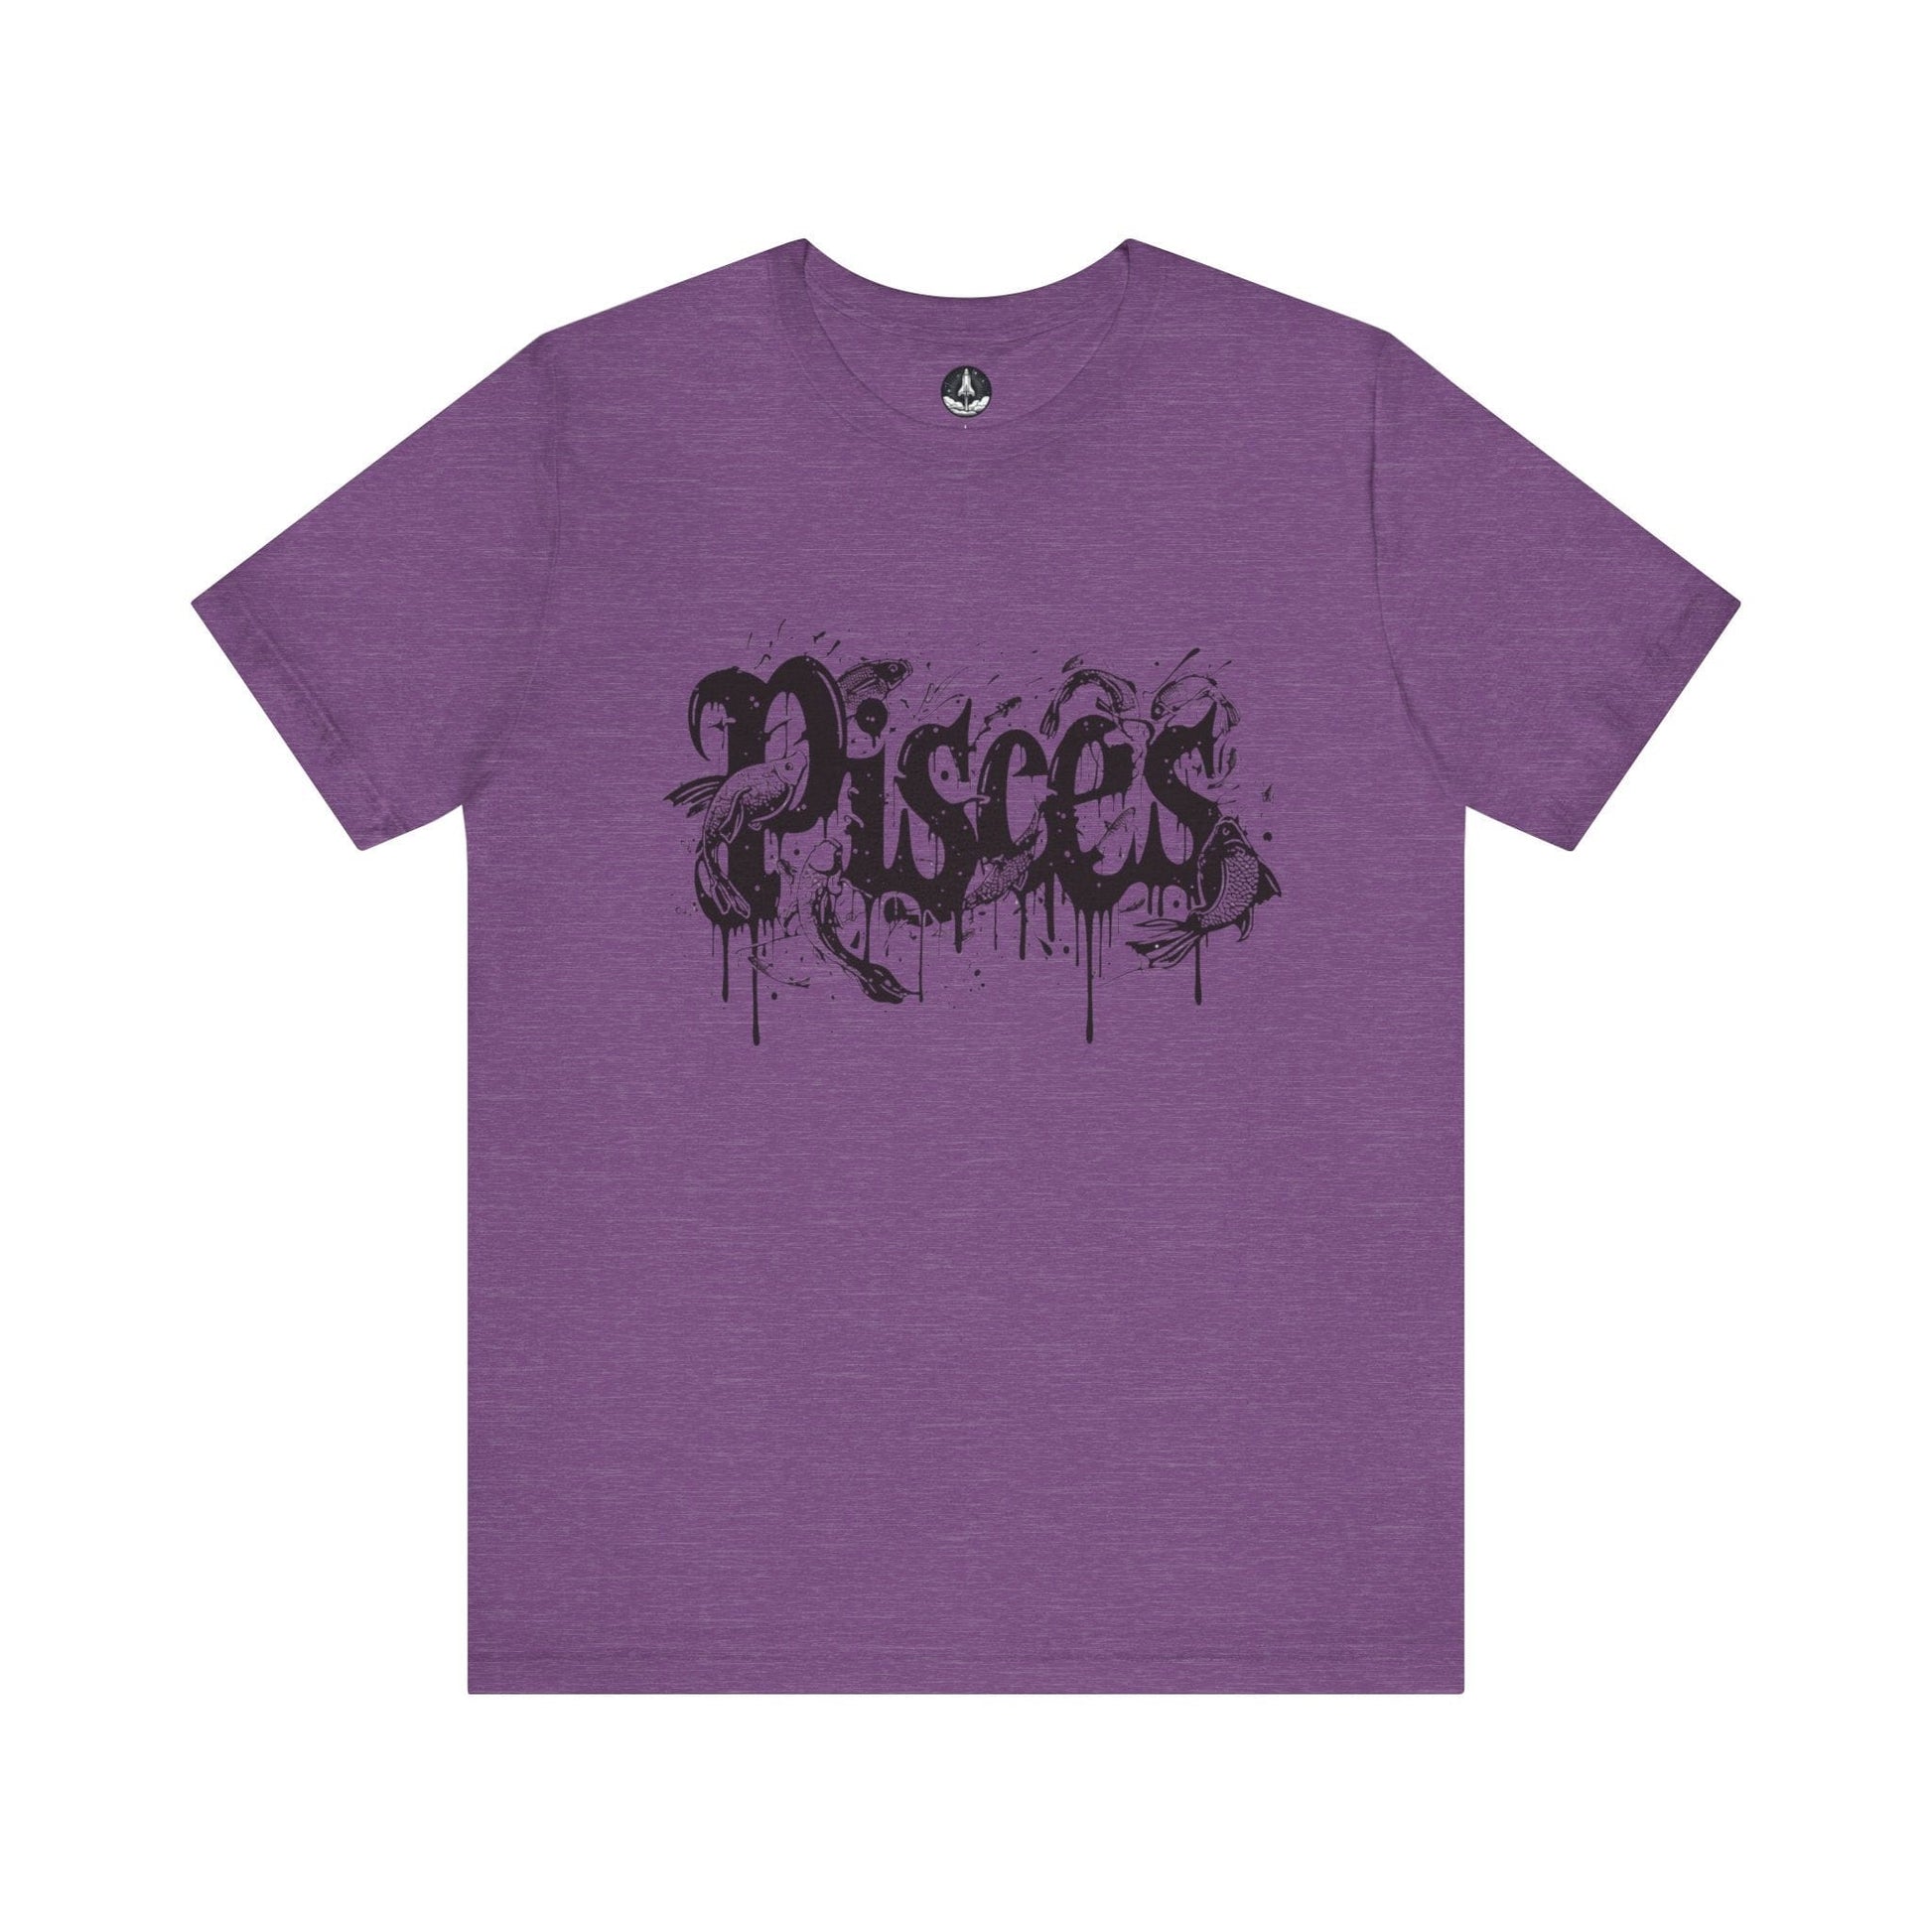 T-Shirt Heather Team Purple / S Deep Dive Pisces TShirt: Immerse in the Artistic Tide